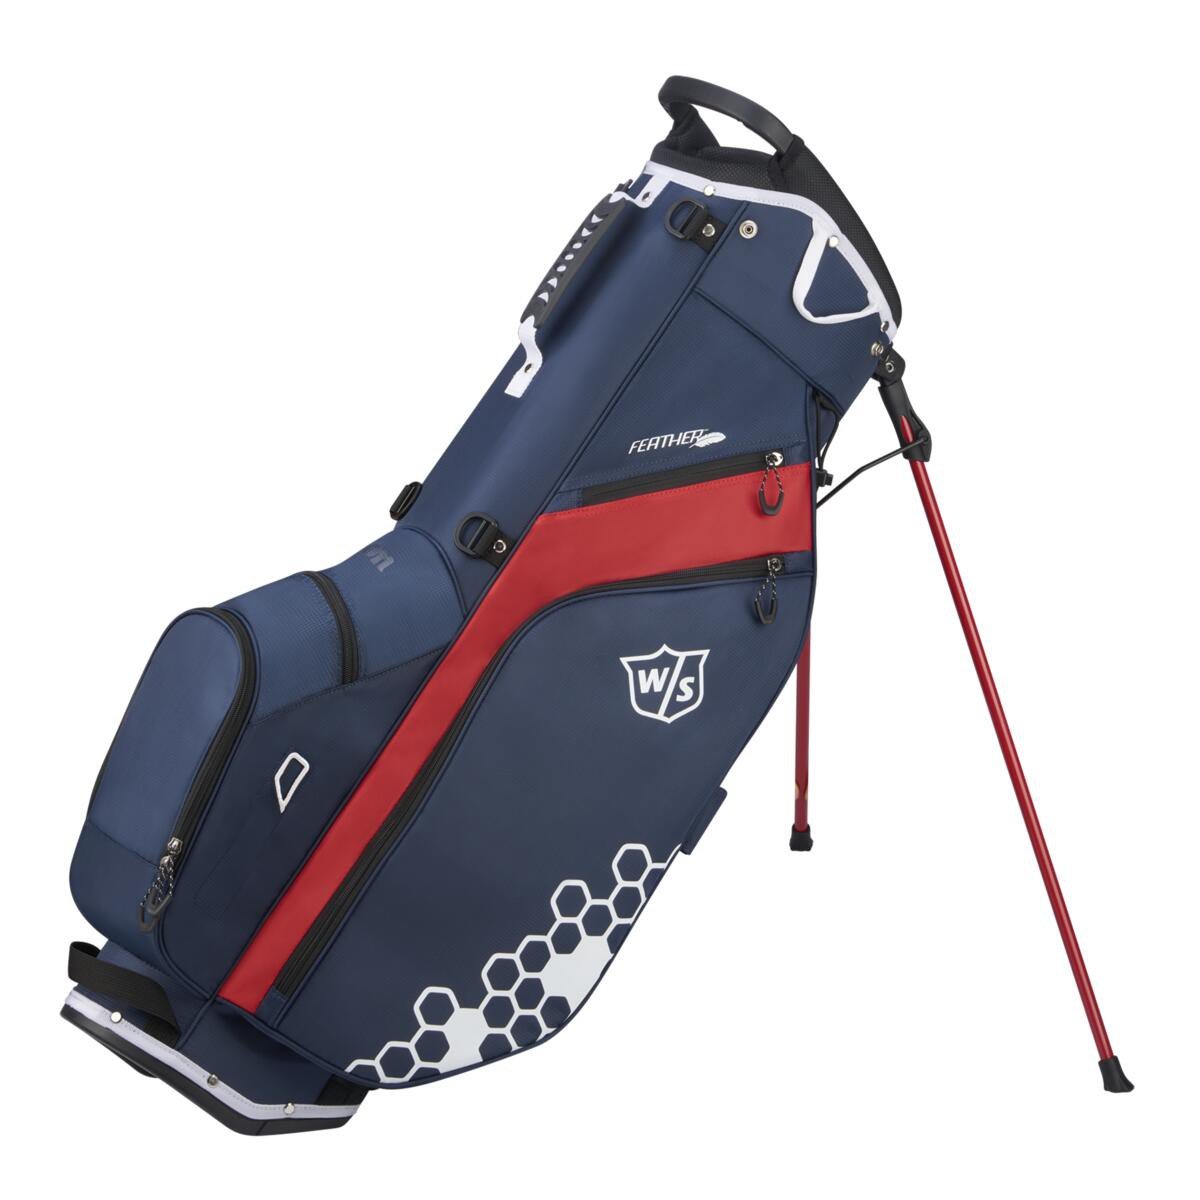 Wilson - W/S FEATHER Golf Bag NARDWH